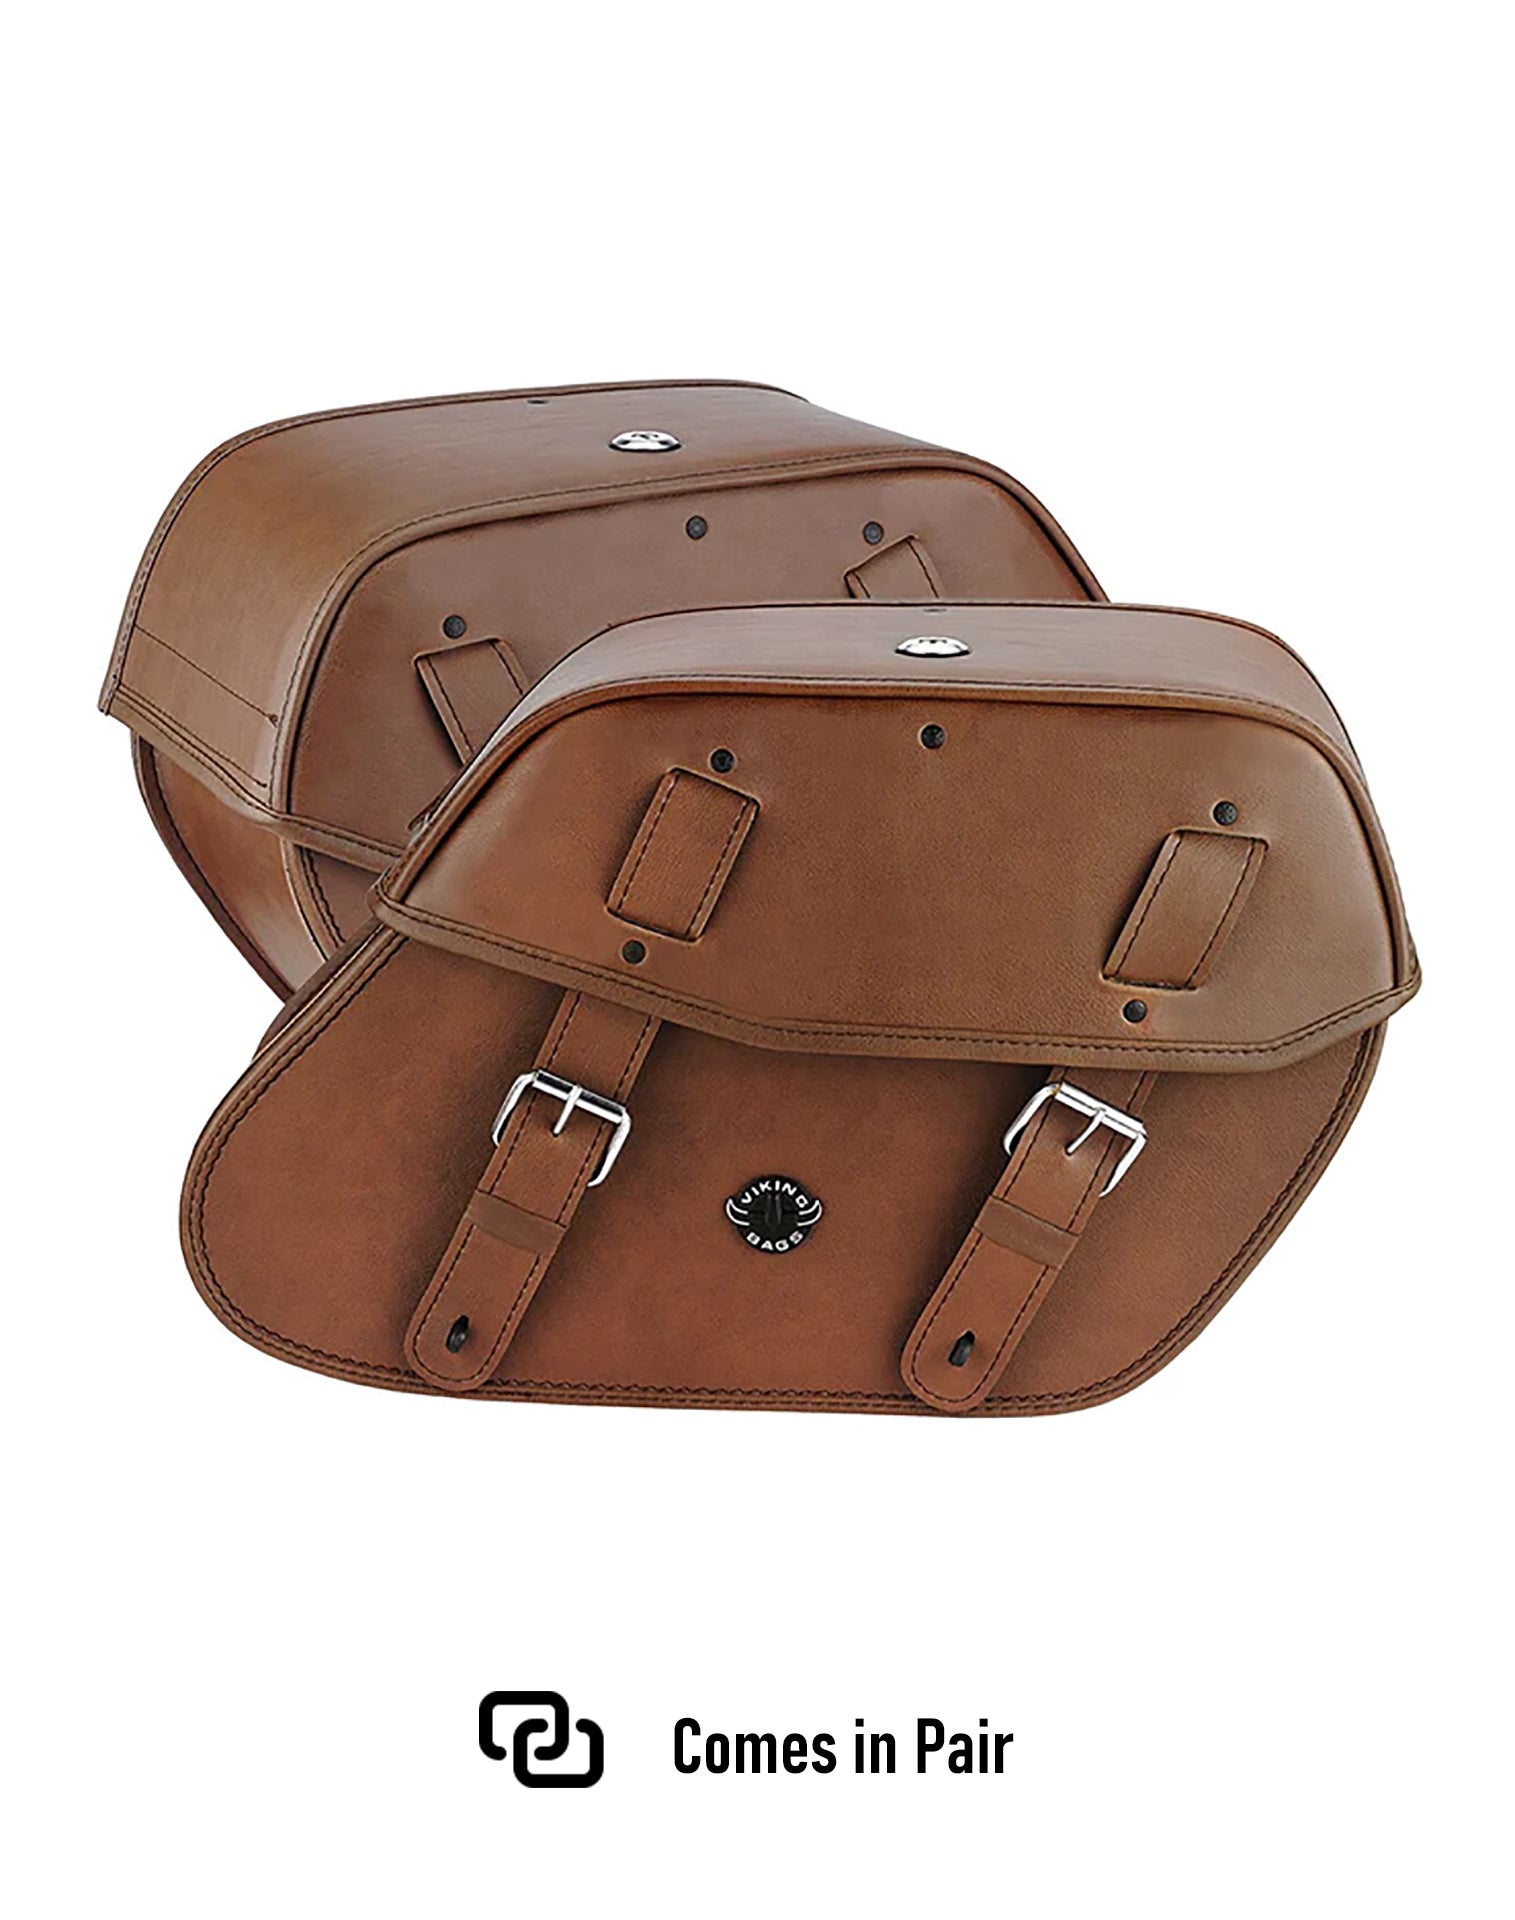 Viking Odin Brown Large Triumph Rocket Iii Touring Leather Motorcycle Saddlebags Weather Resistant Bags Comes in Pair